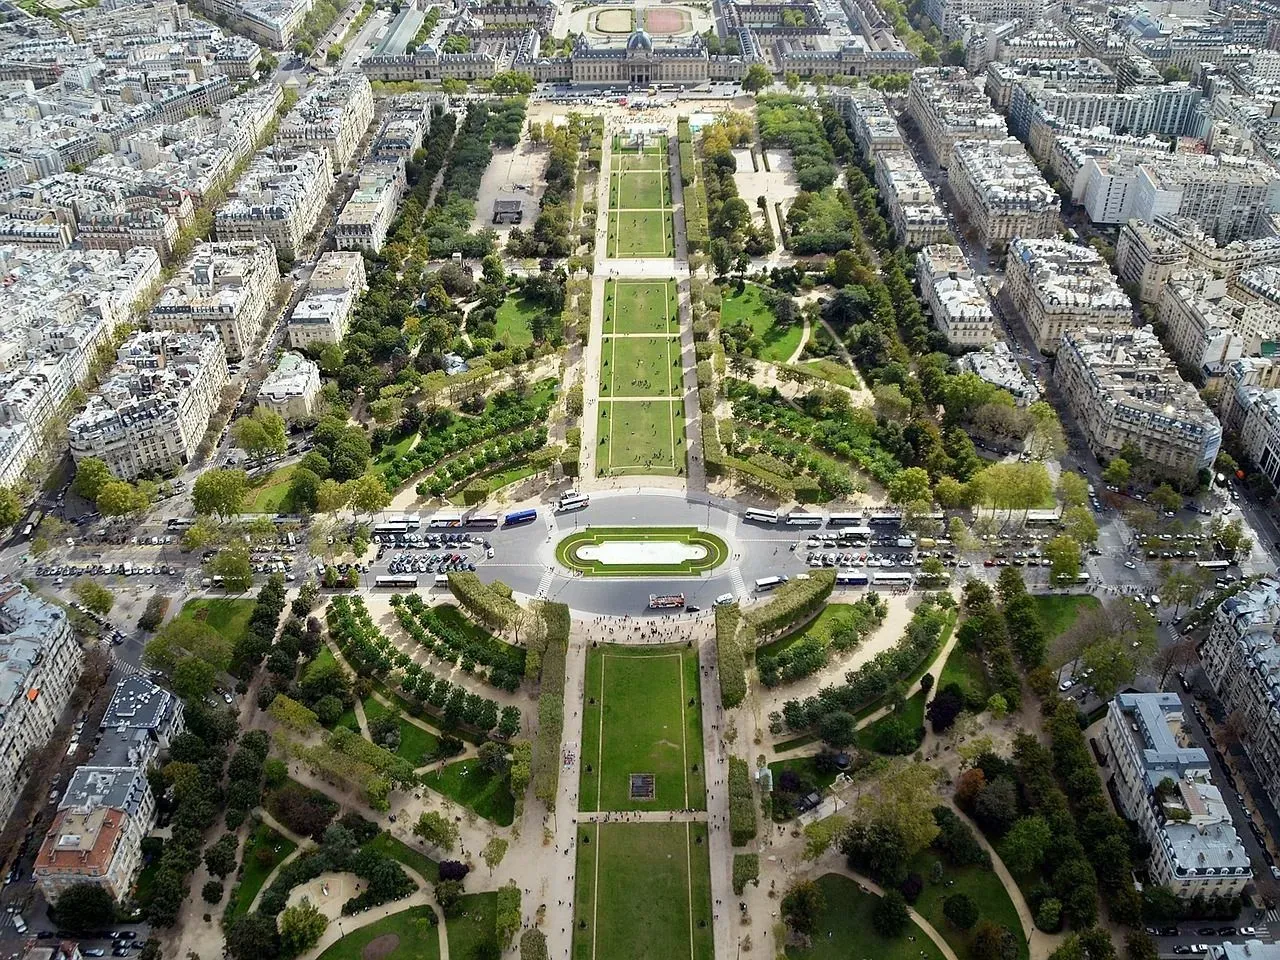 Reading about gardens of Champ De Mars near the Eiffel Tower will let you discover the heritage and culture of France.